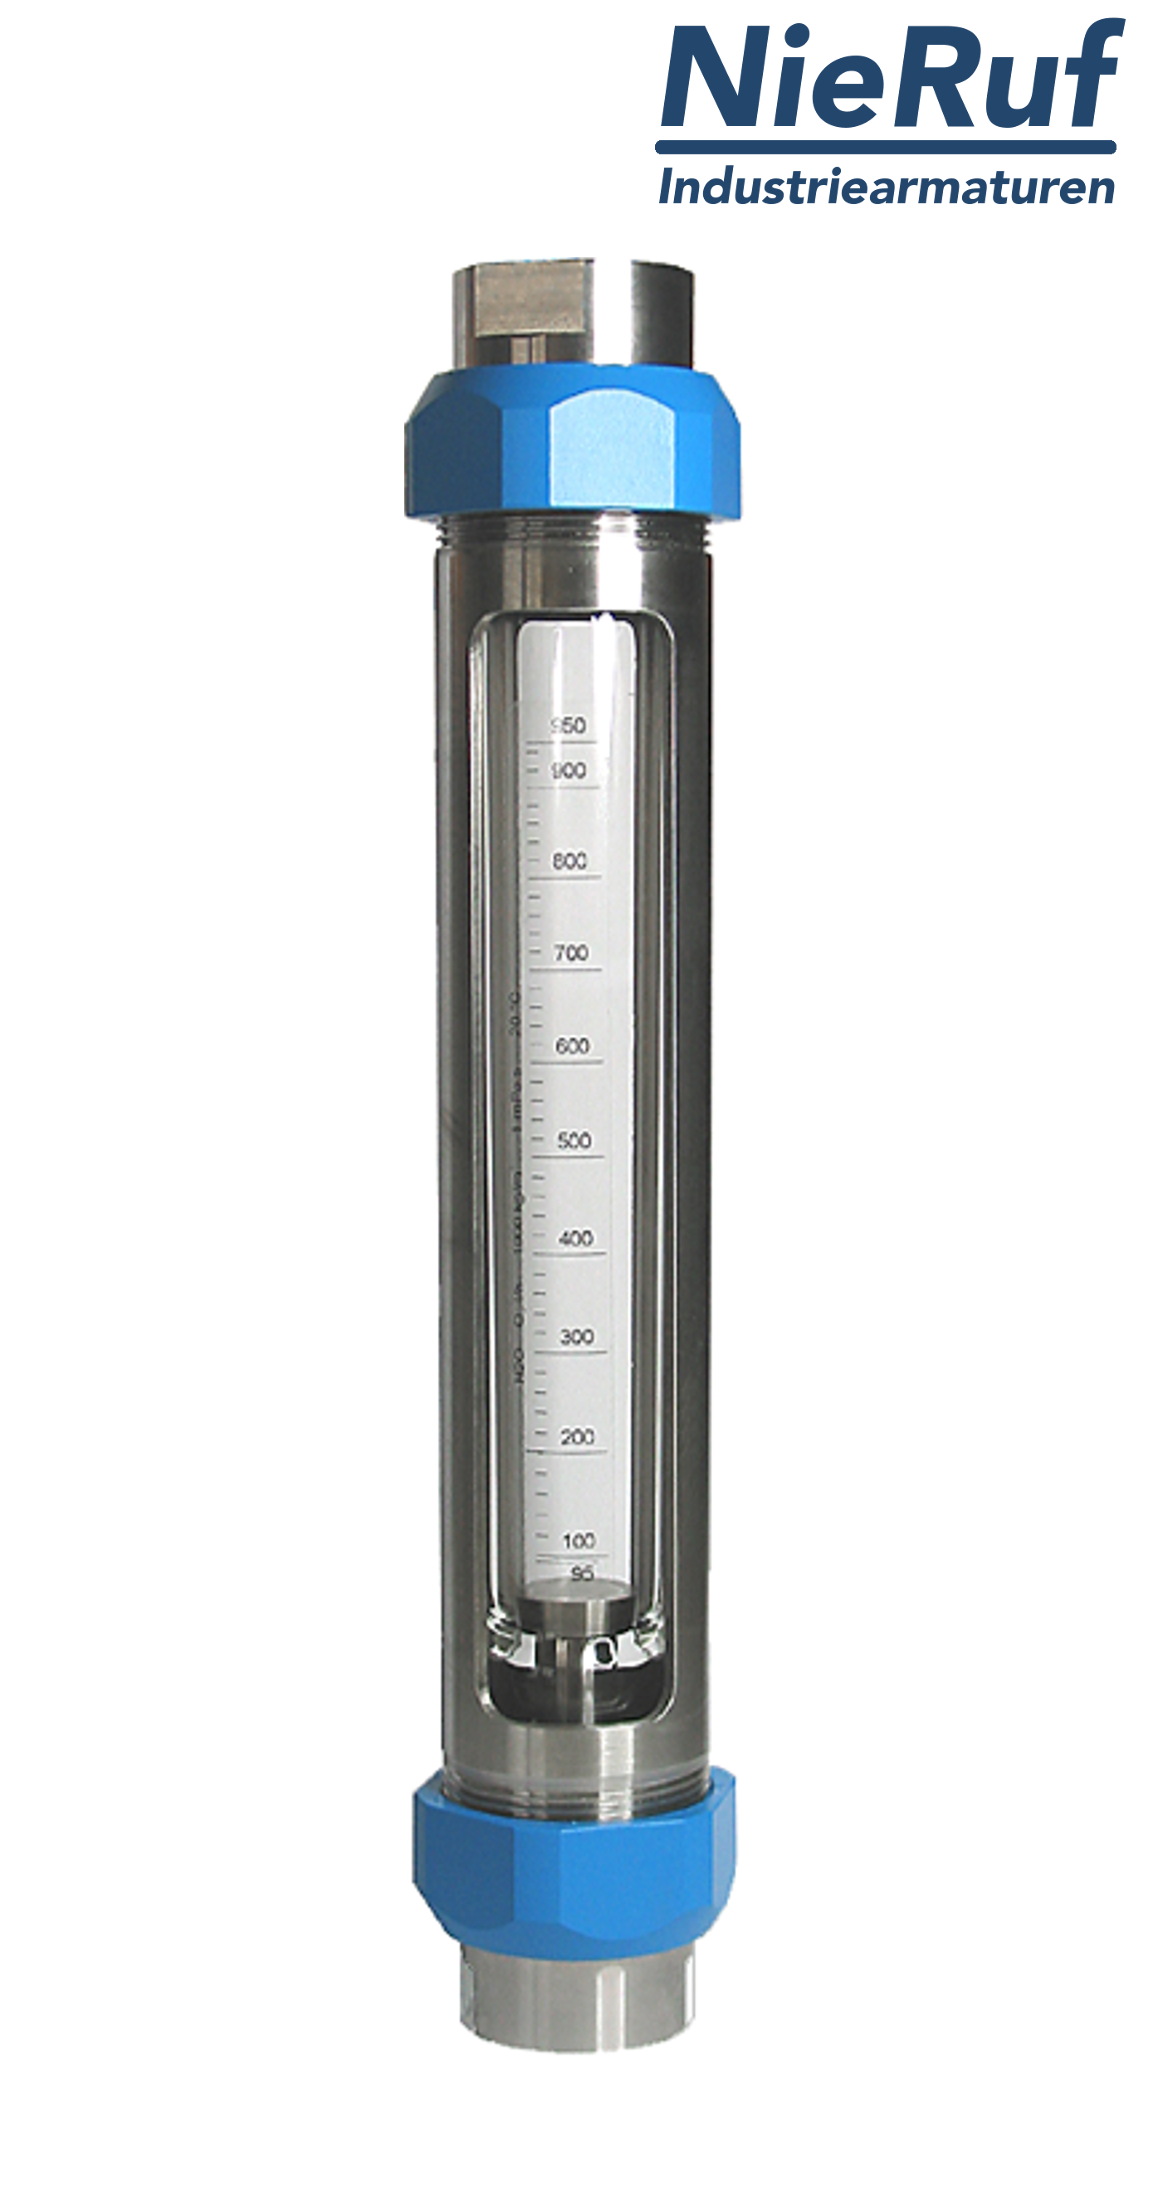 Variable area flowmeter stainless steel + borosilicate 1/2" inch 16.0 - 160 l/h water FKM